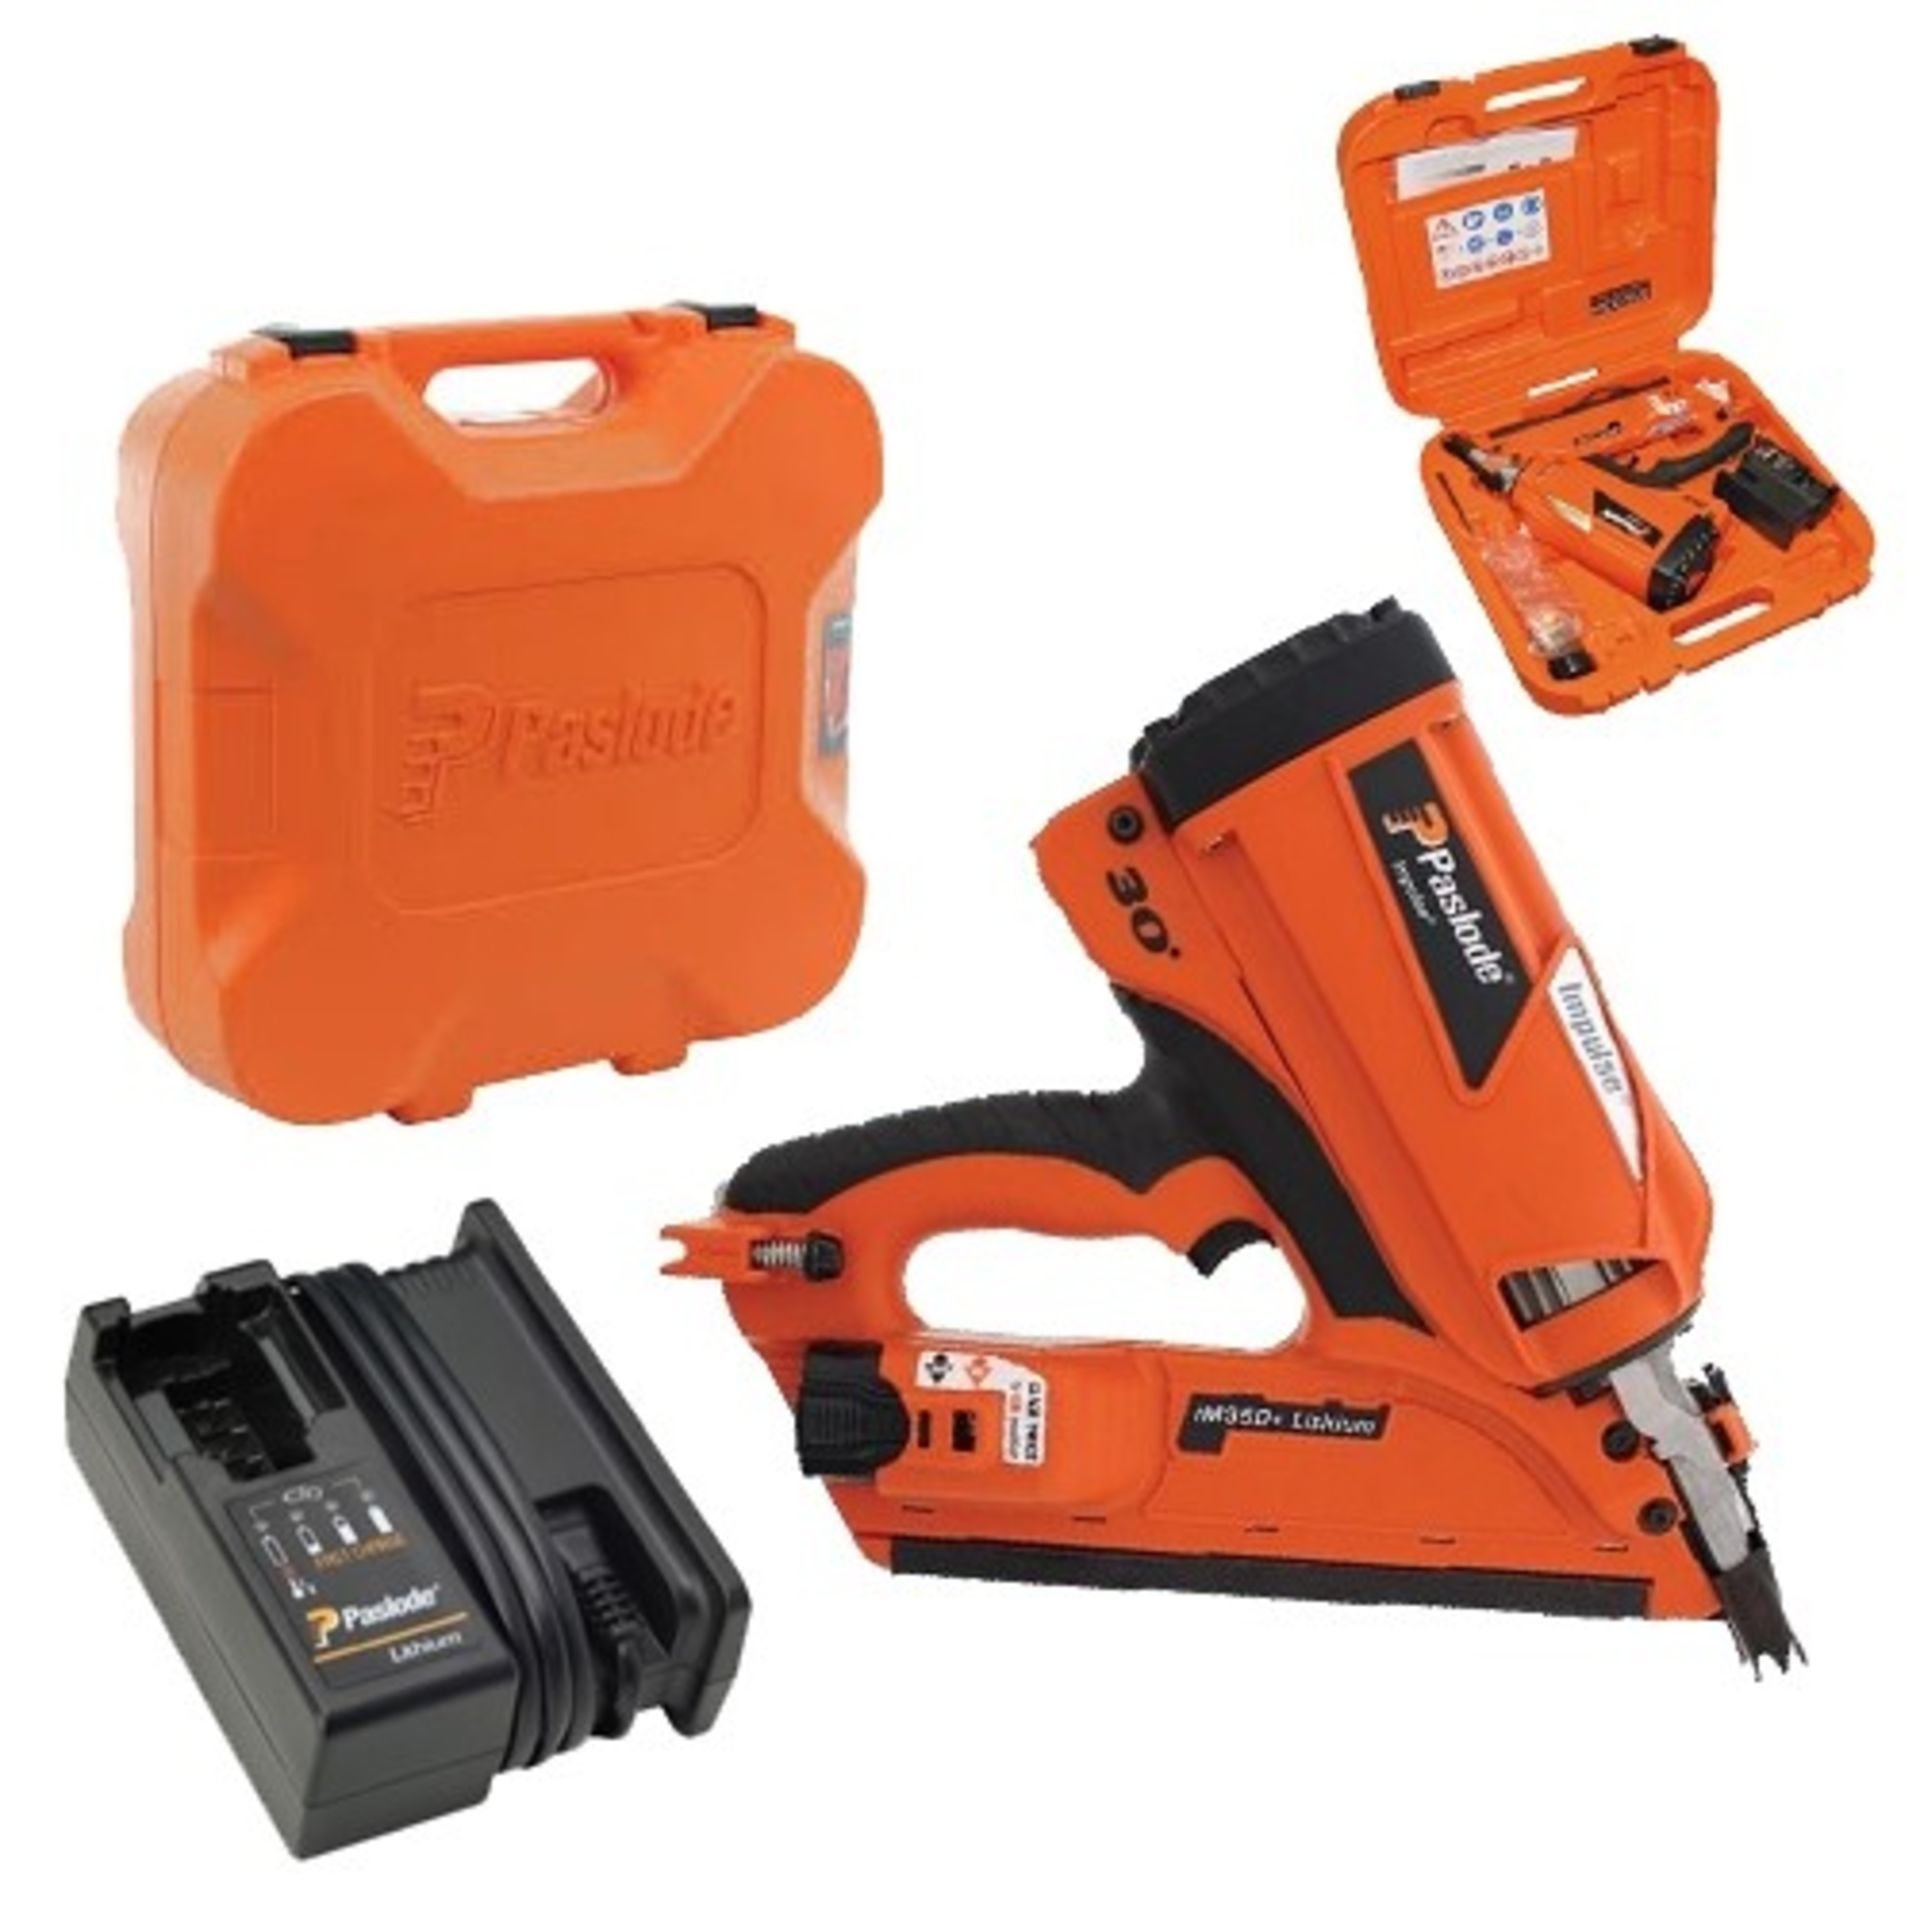 V Brand New Paslode IM350 Plus 90mm 7.4v 2.1Ah Li-ion First Fix Angled Gas Framing Nailer With